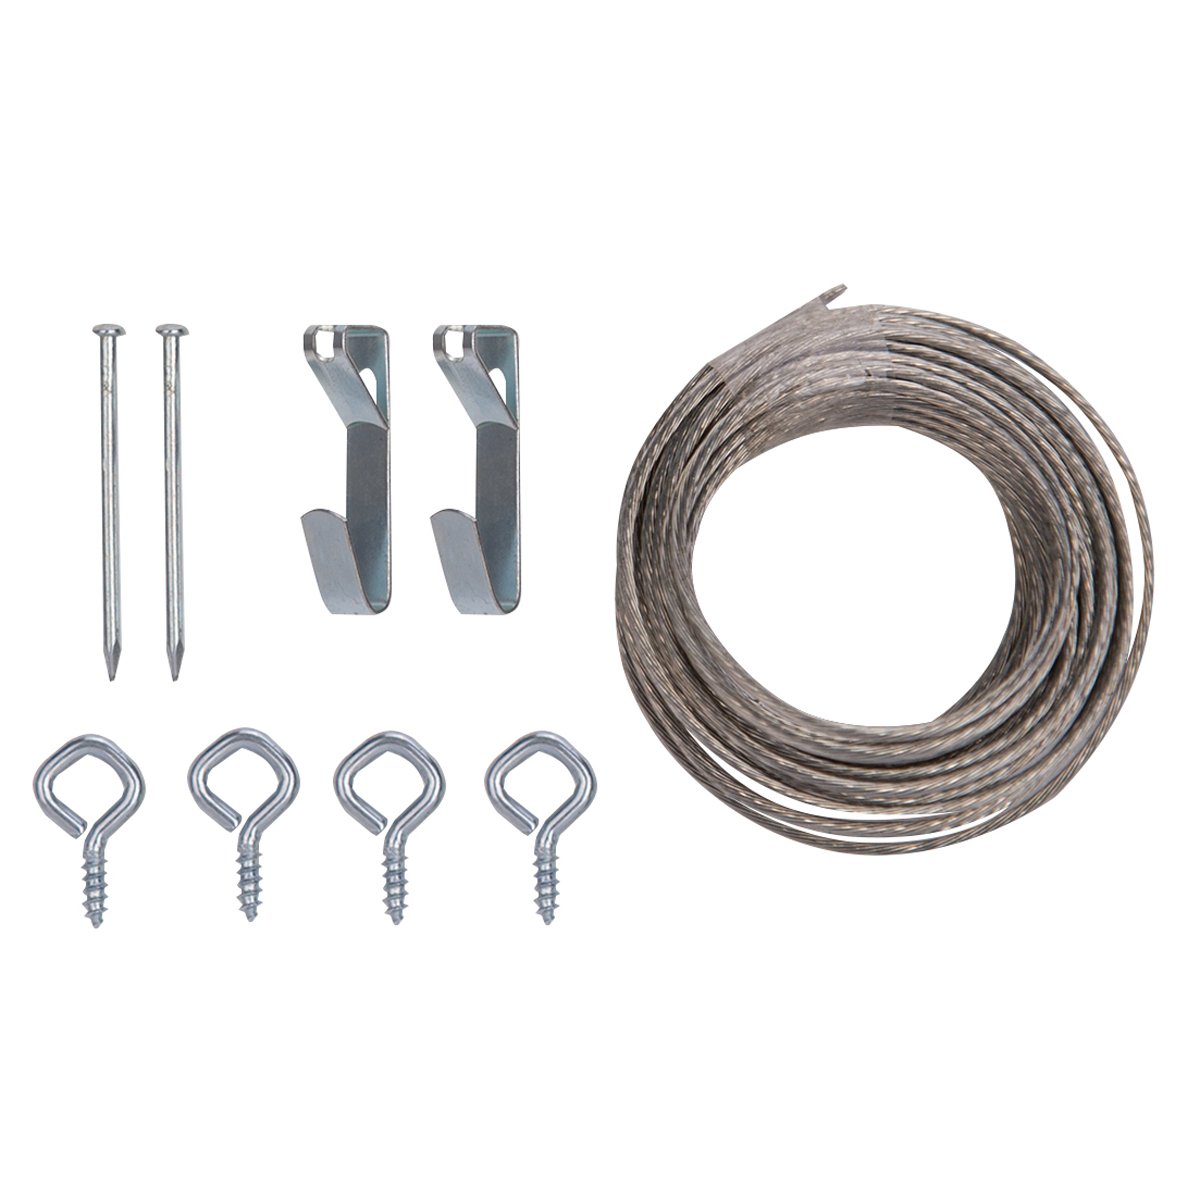 PH-121128-PS Picture Hanging Kit, 30 lb, Steel, Zinc, Zinc, Nail-In Mounting